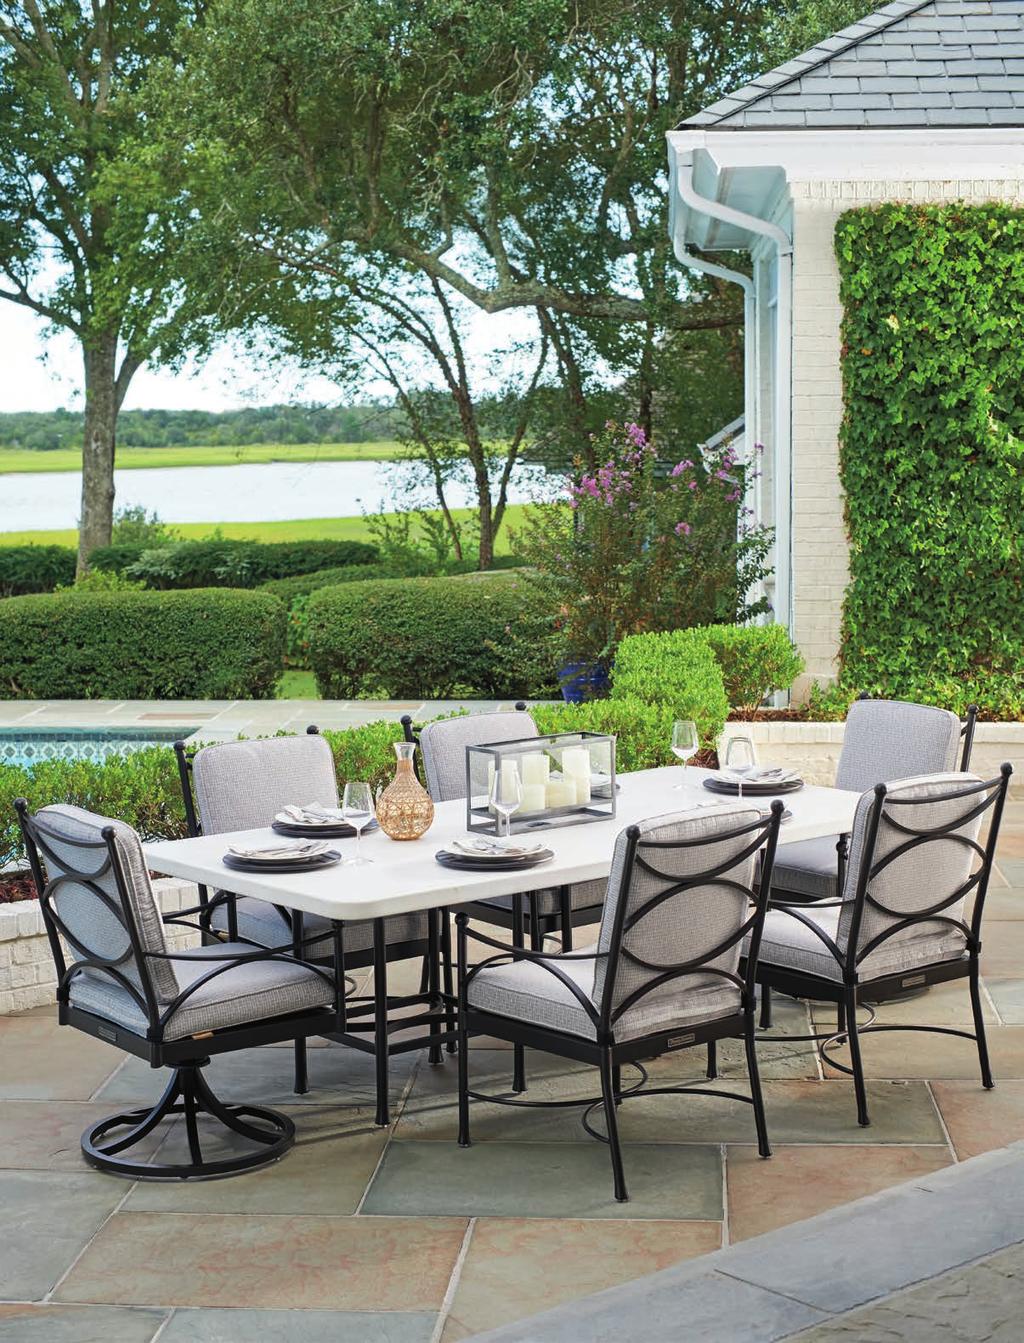 offers the flexibility of two dining table options. The 84-inch by 44-inch rectangular design comfortably accommodates six guests.